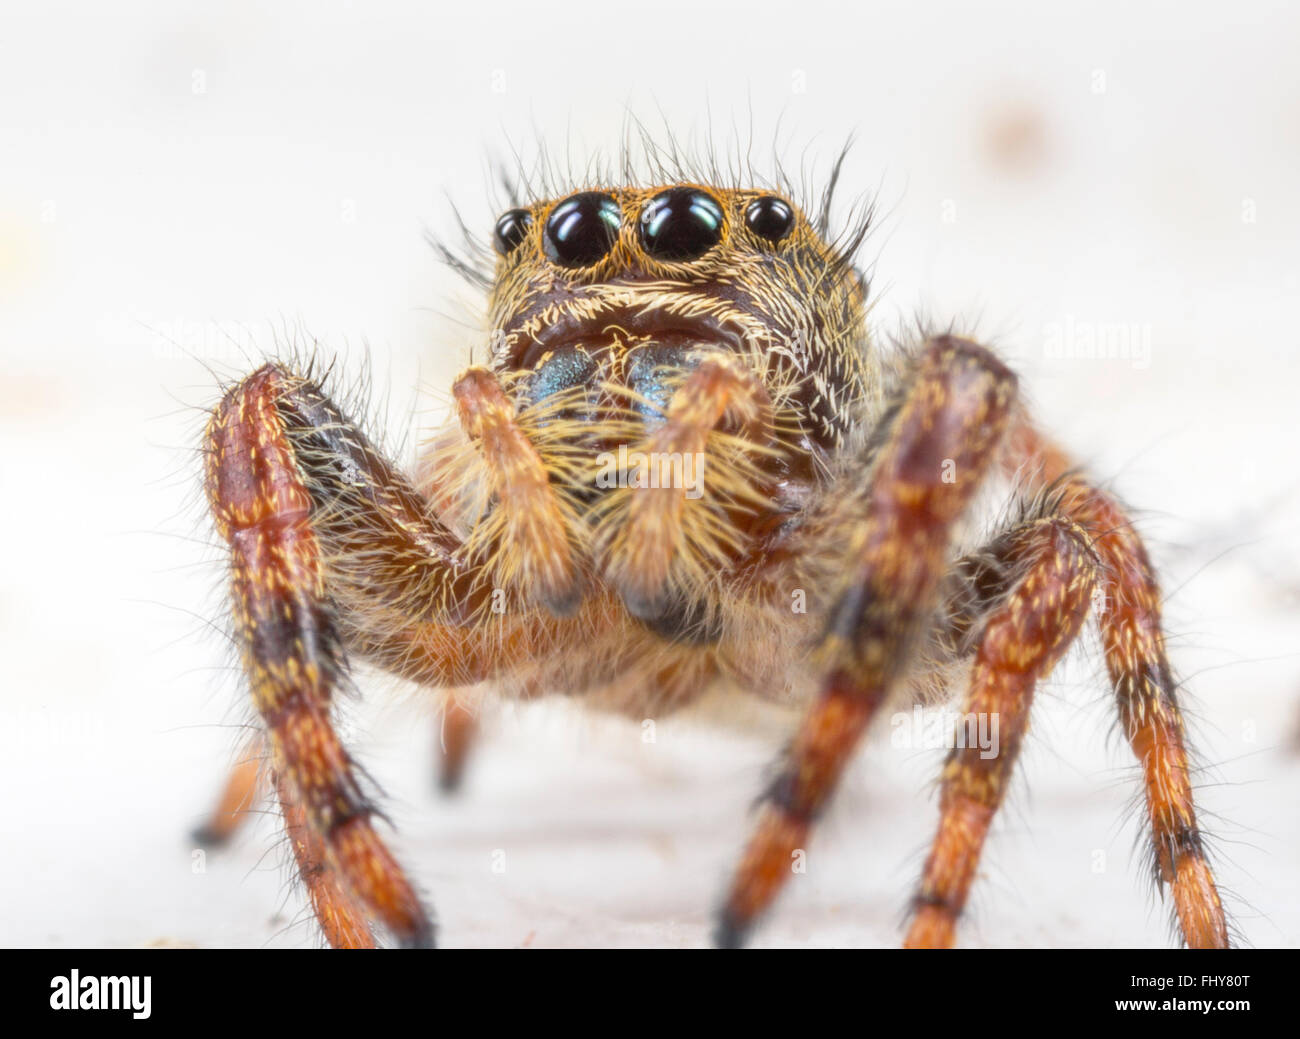 Jumping Spider-close up Stock Photo